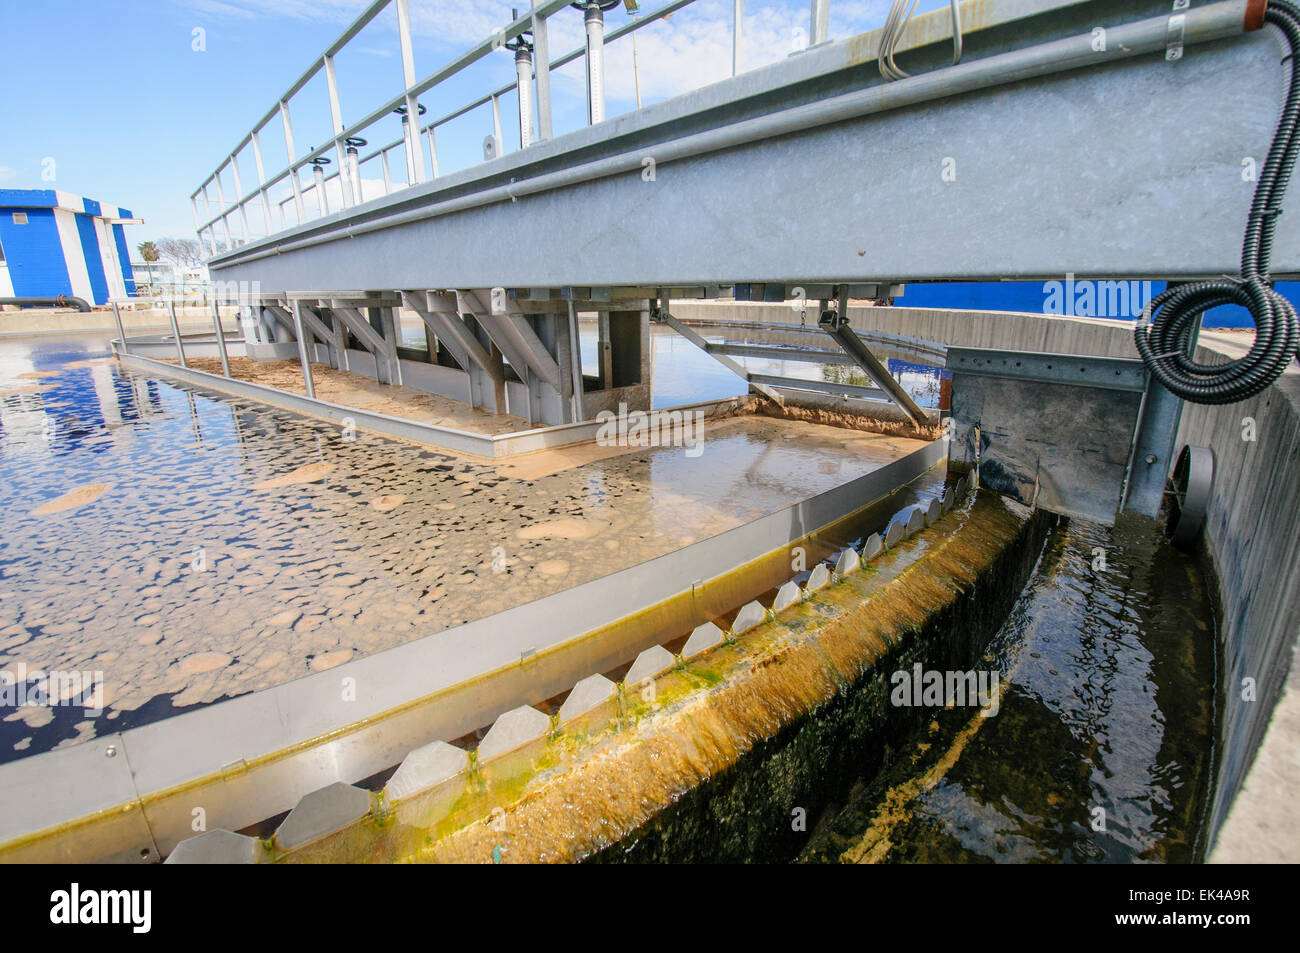 Sewerage treatment facility. The treated water is then used for irrigation and agricultural use. Photographed near Hadera, Israe Stock Photo